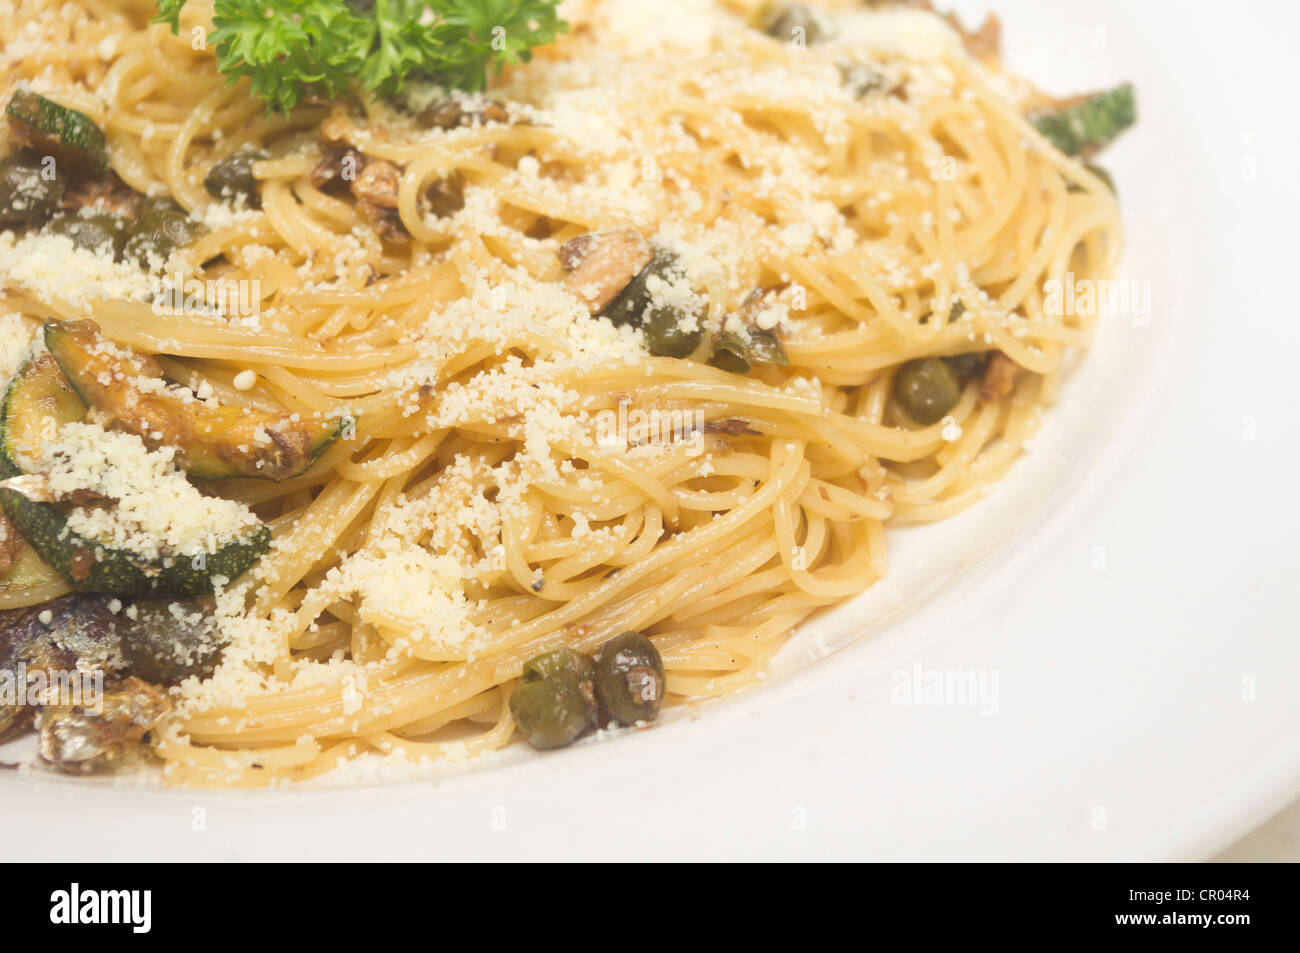 Pasta Con Sarde, Pasta with dried sardines, pickles and parmesan cheese. Stock Photo